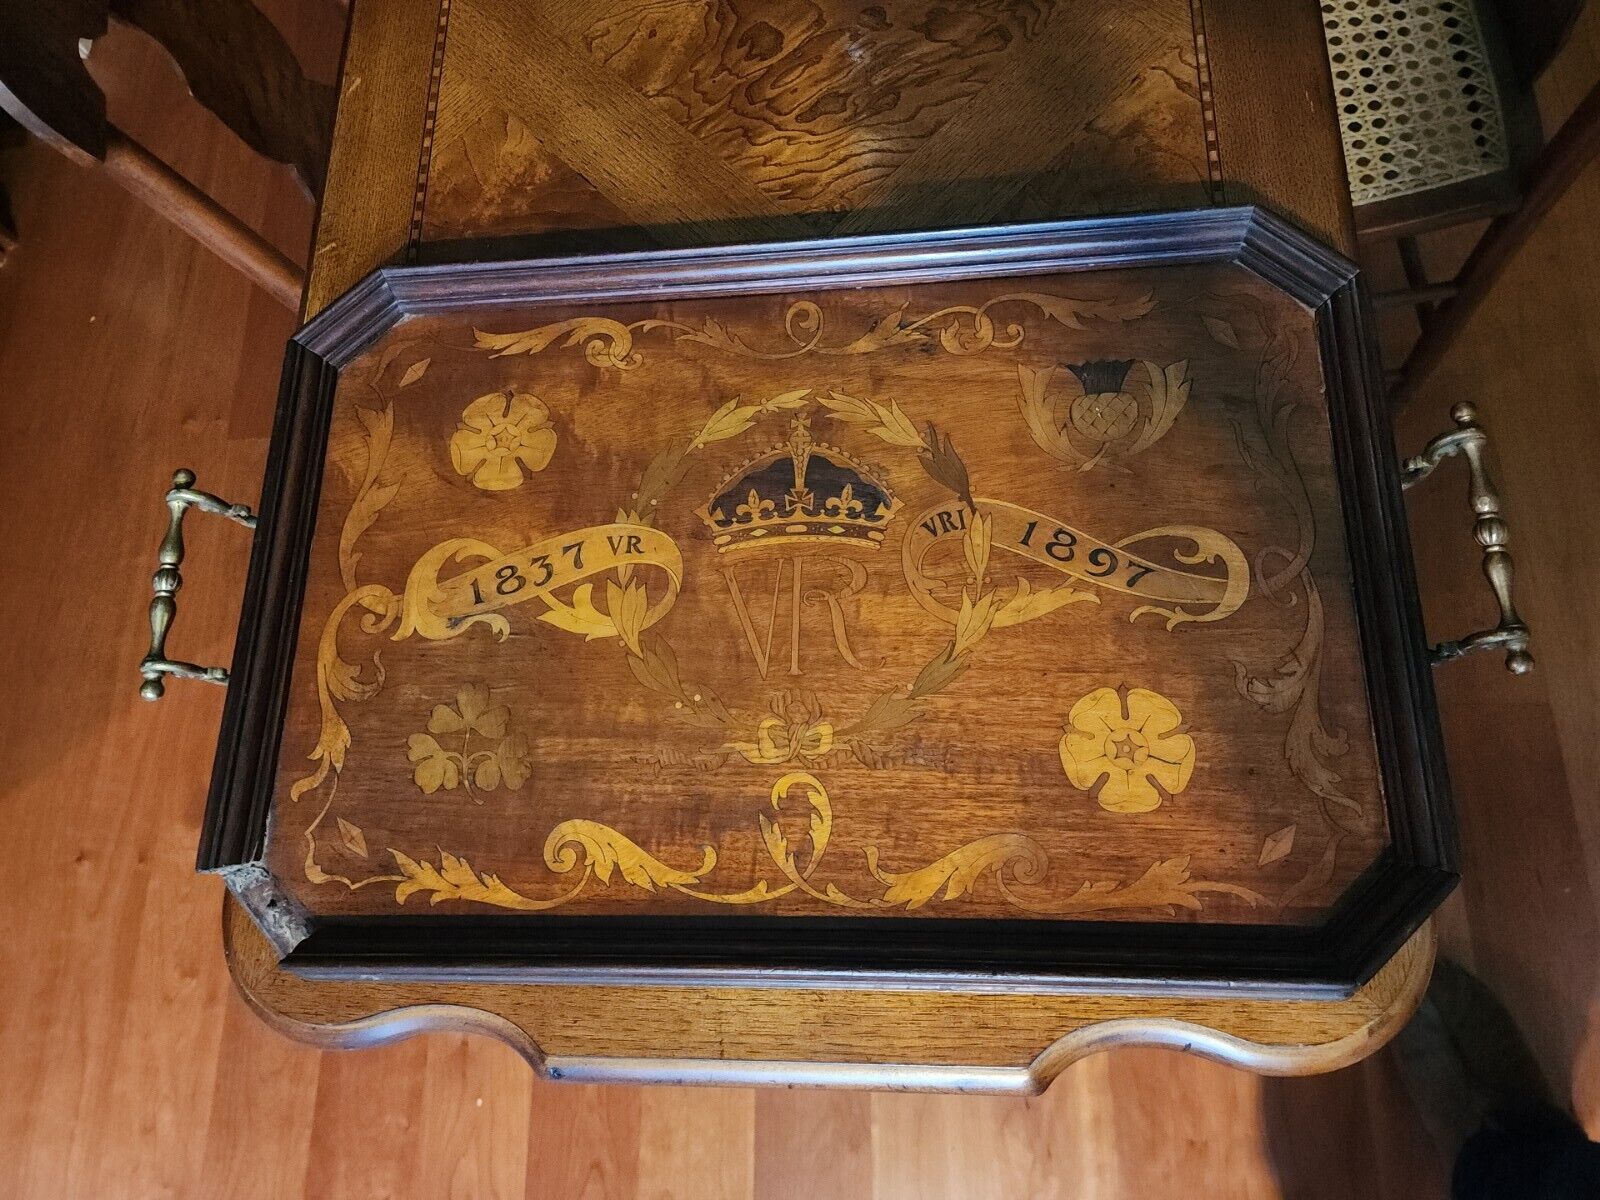 Extremely Rare Queen Victoria DIAMOND JUBILEE inlaid Wood Butlers Tray 1837 1897